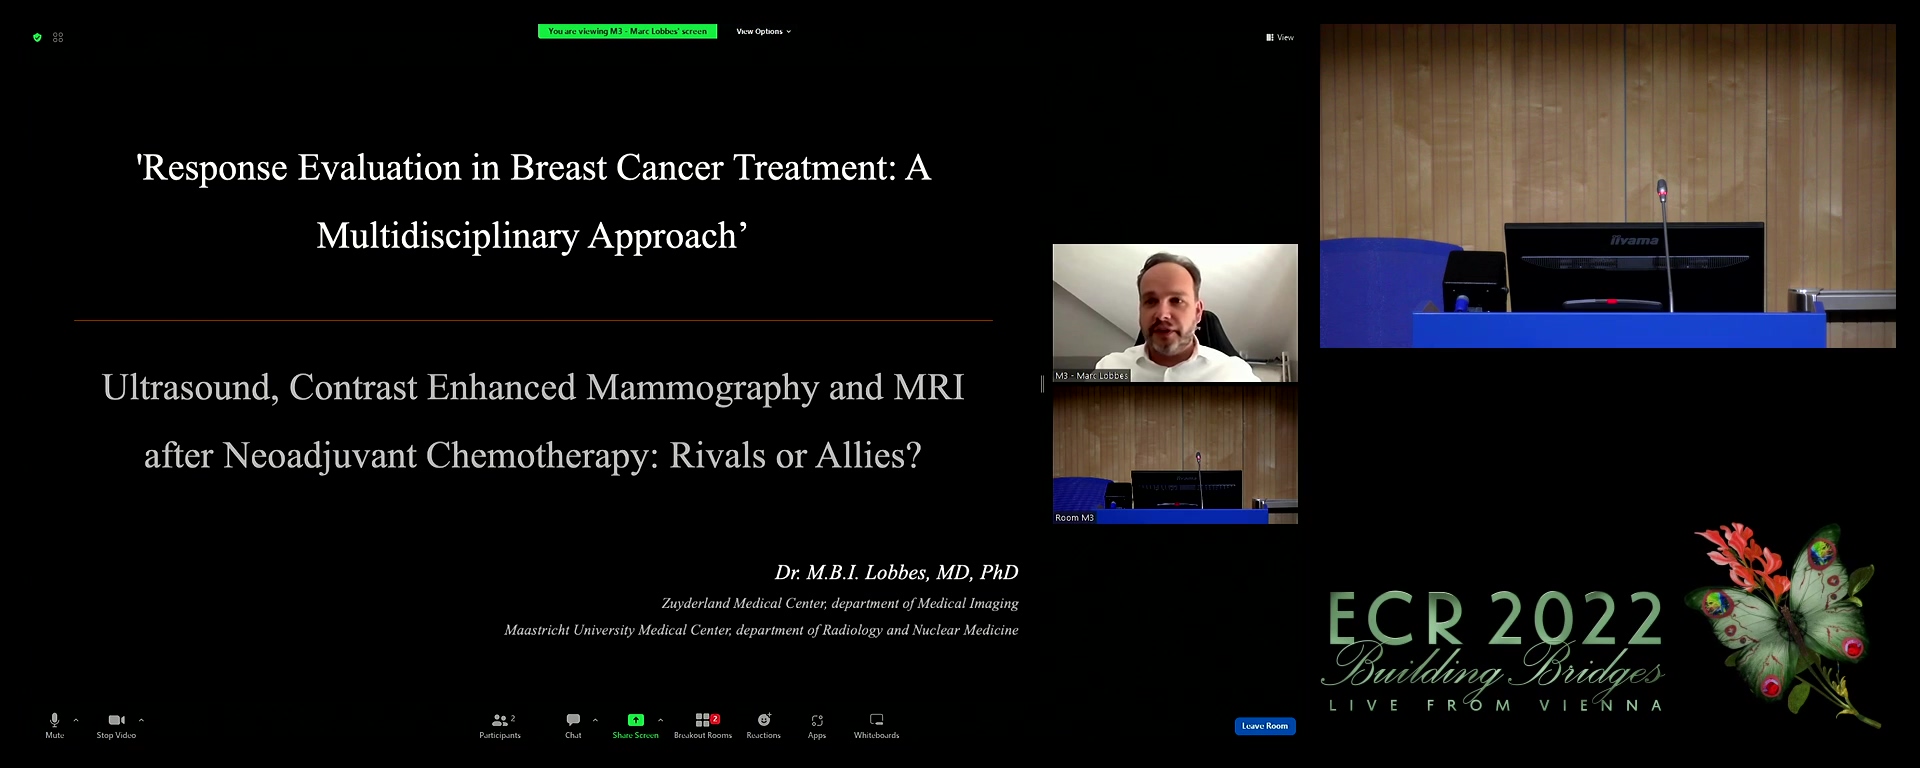 Ultrasound, contrast-enhanced mammography, and MRI after neoadjuvant chemotherapy: rivals or allies?